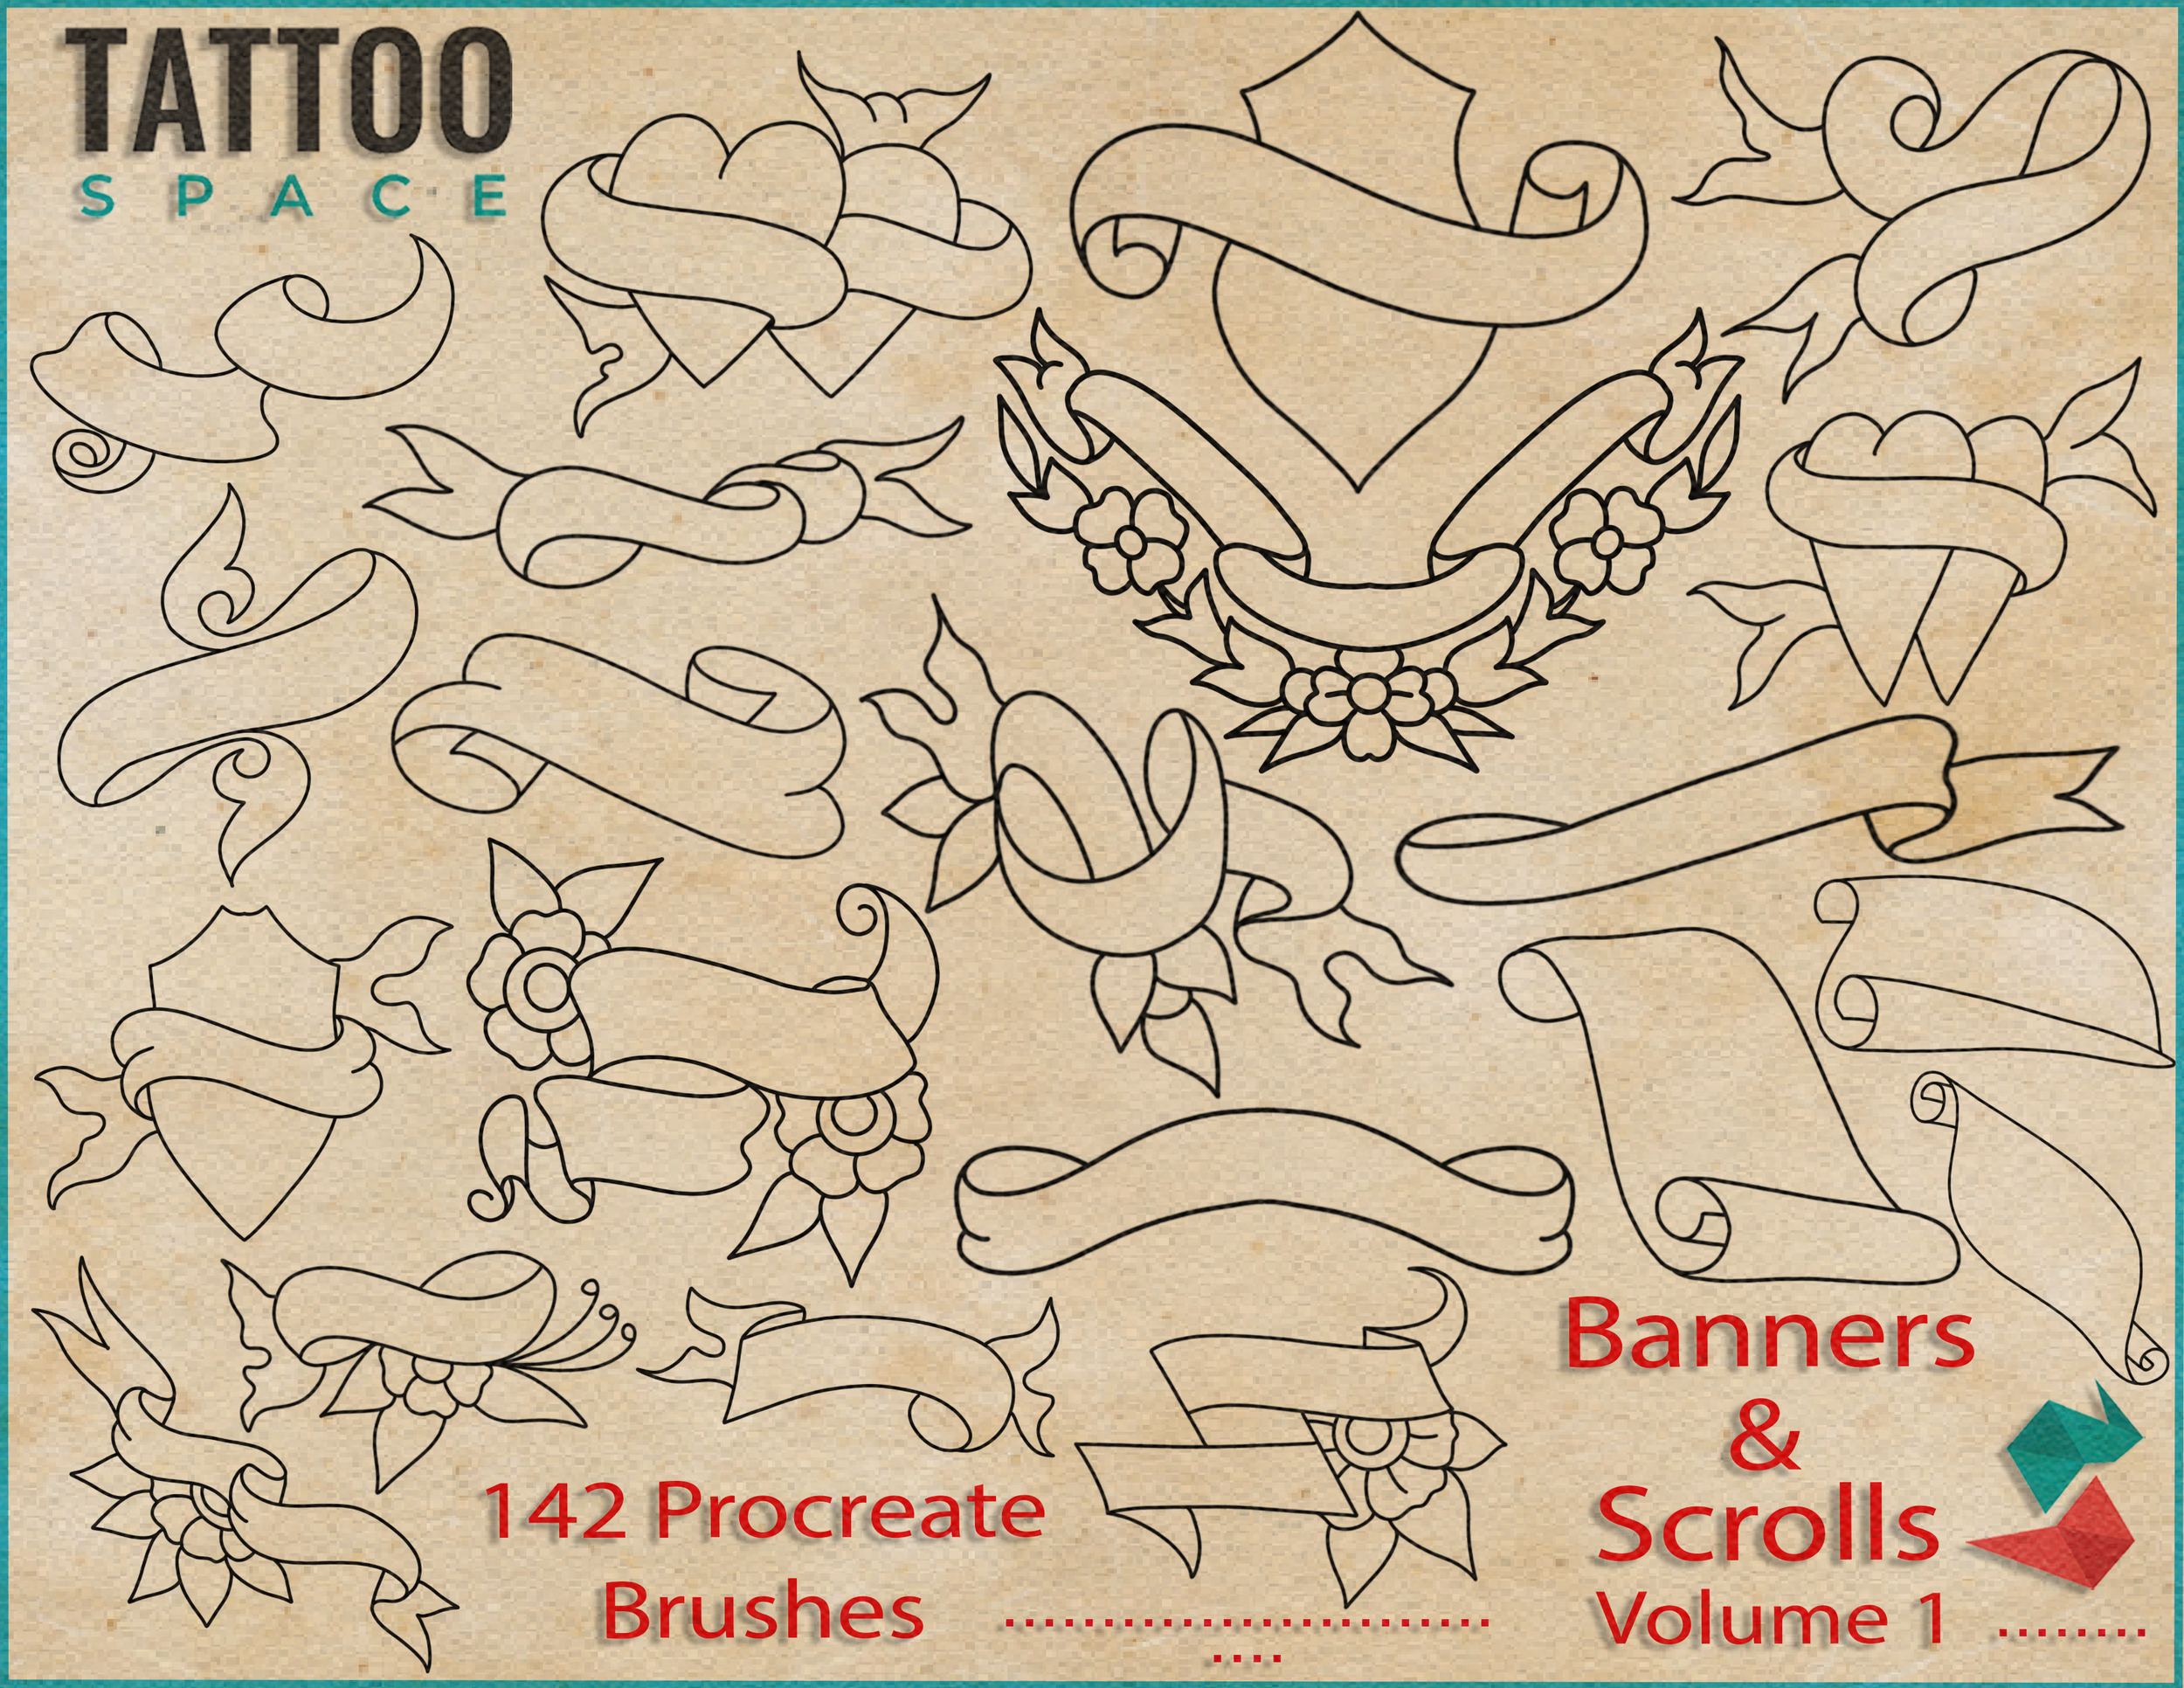 Banners and Scrolls Tattoos — Tattoo Space